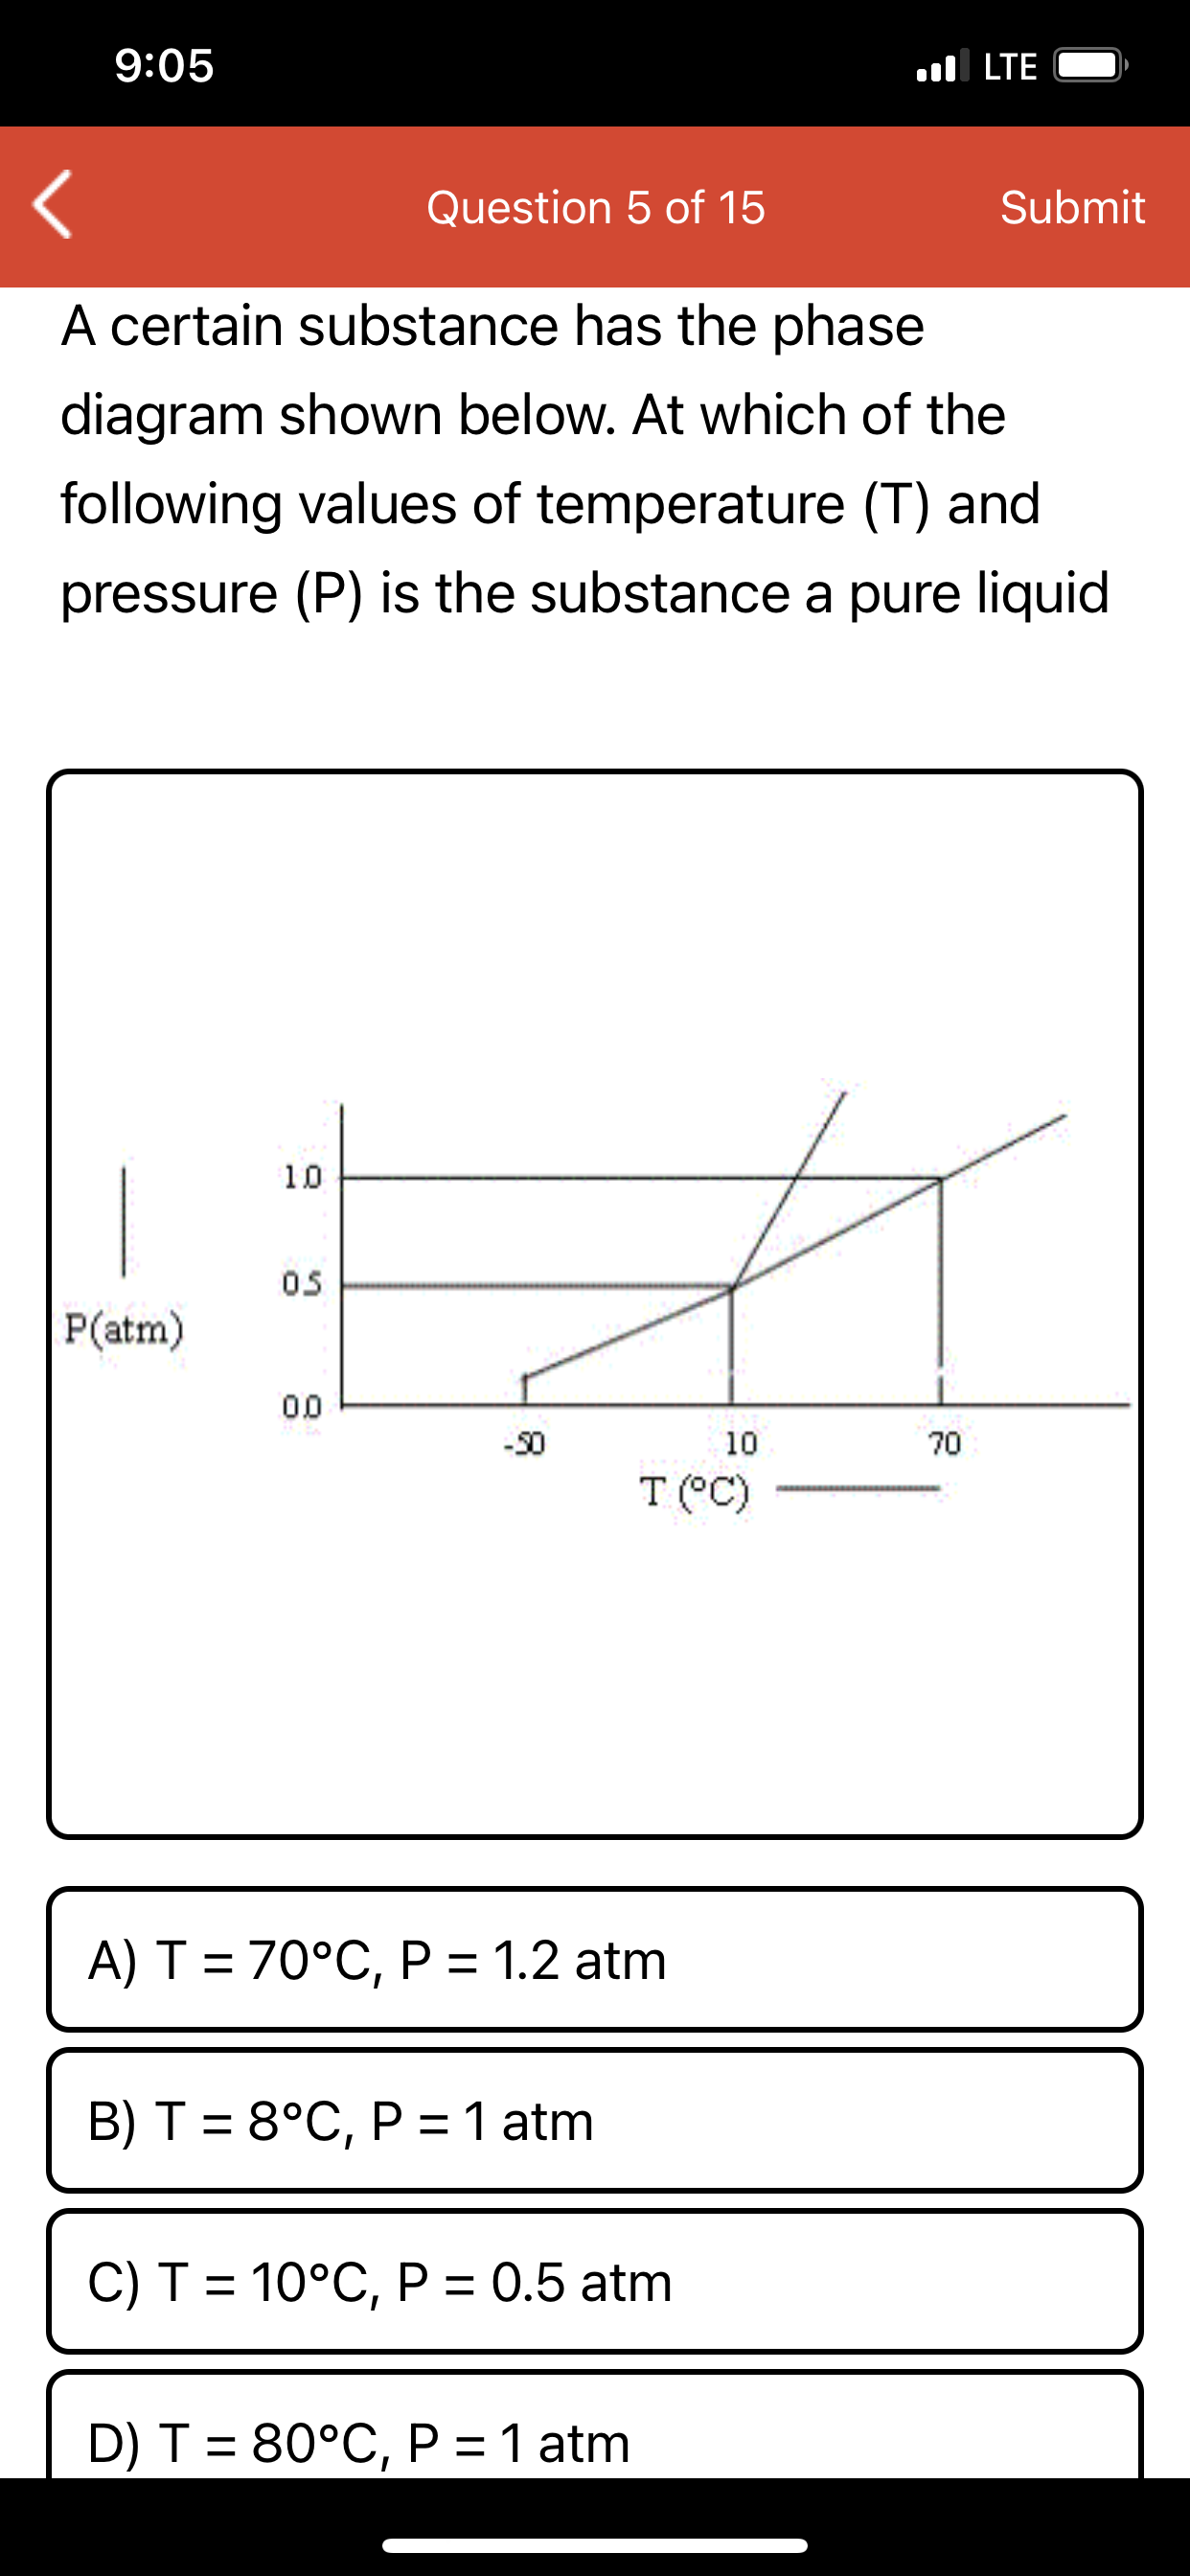 A certain substance has the phase
diagram shown below. At which of the
following values of temperature (T) and
pressure (P) is the substance a pure liquid
10
05
P(atm)
00
-30
10
70
T (°C)
A) T = 70°C, P = 1.2 atm
B) T = 8°C, P =1 atm
C) T = 10°C, P = 0.5 atm
D) T = 80°C, P = 1 atm
